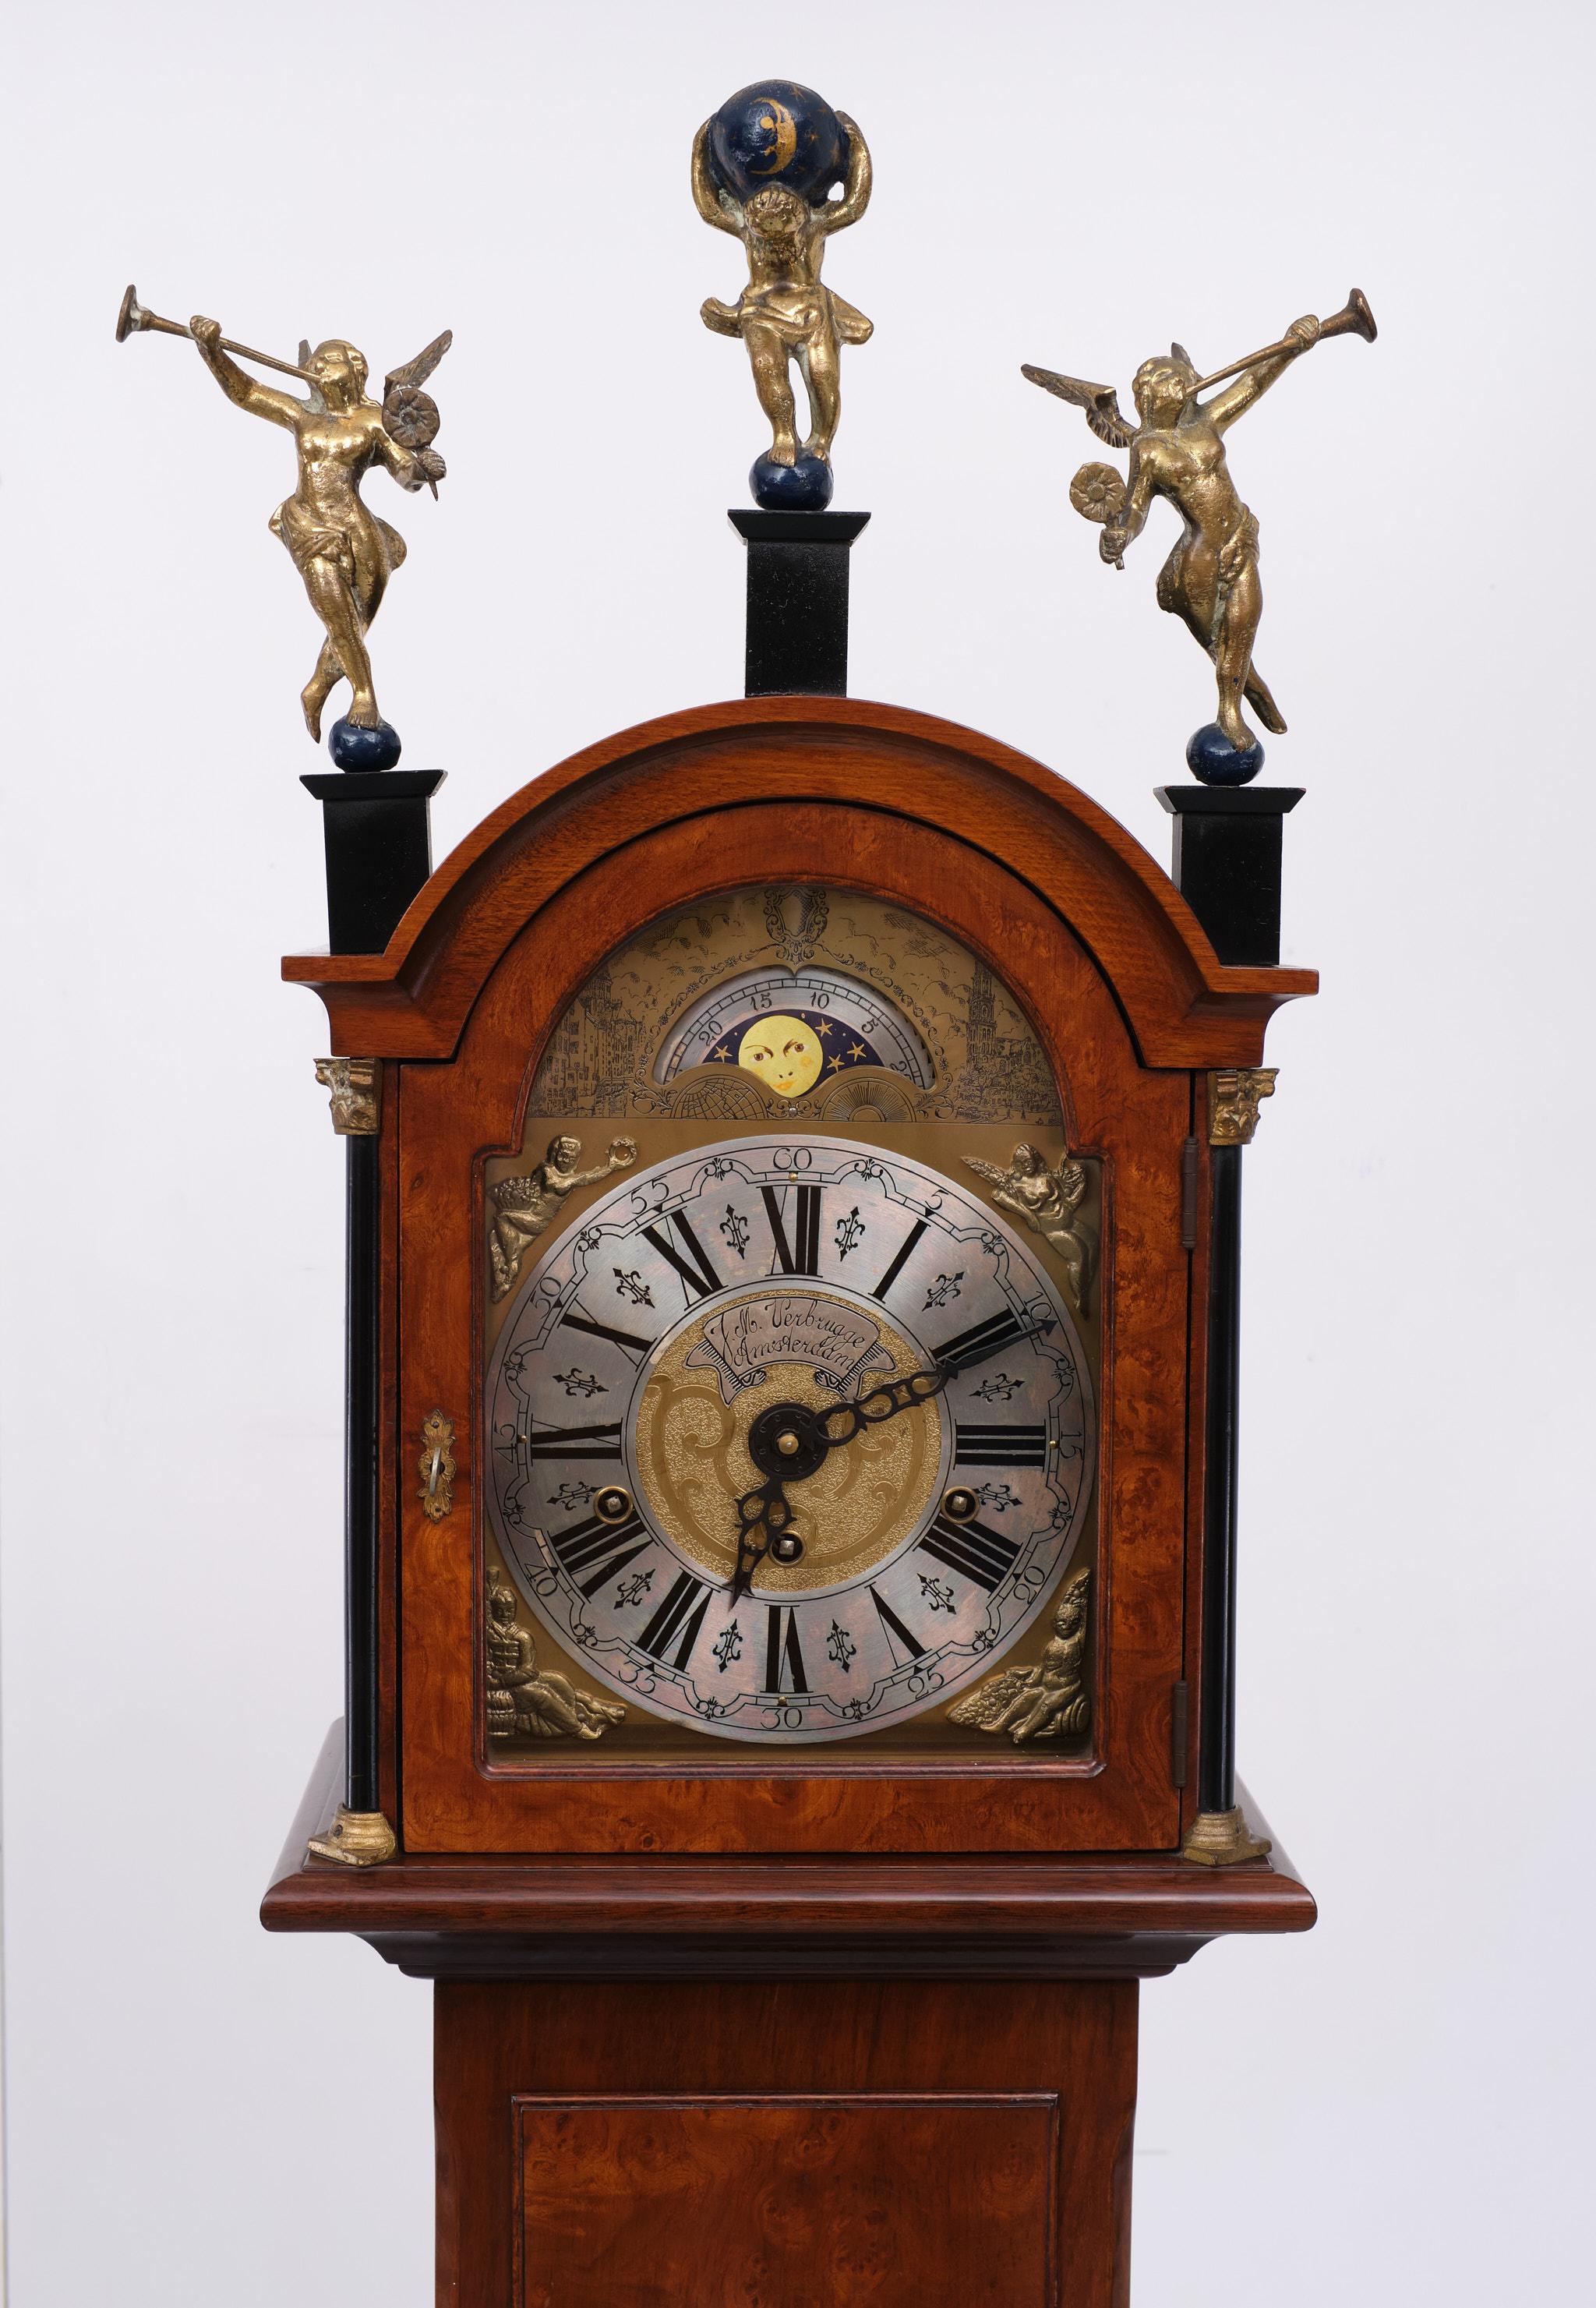 Beautiful Amsterdam long case clock Wuba/Warmink - Period 1960.
This clock has a well-functioning 8-day movement westminster percussion
with quarter-hourly striking mechanism on gong rods.
Beautiful brass dial with engraved bar. In the arch of the